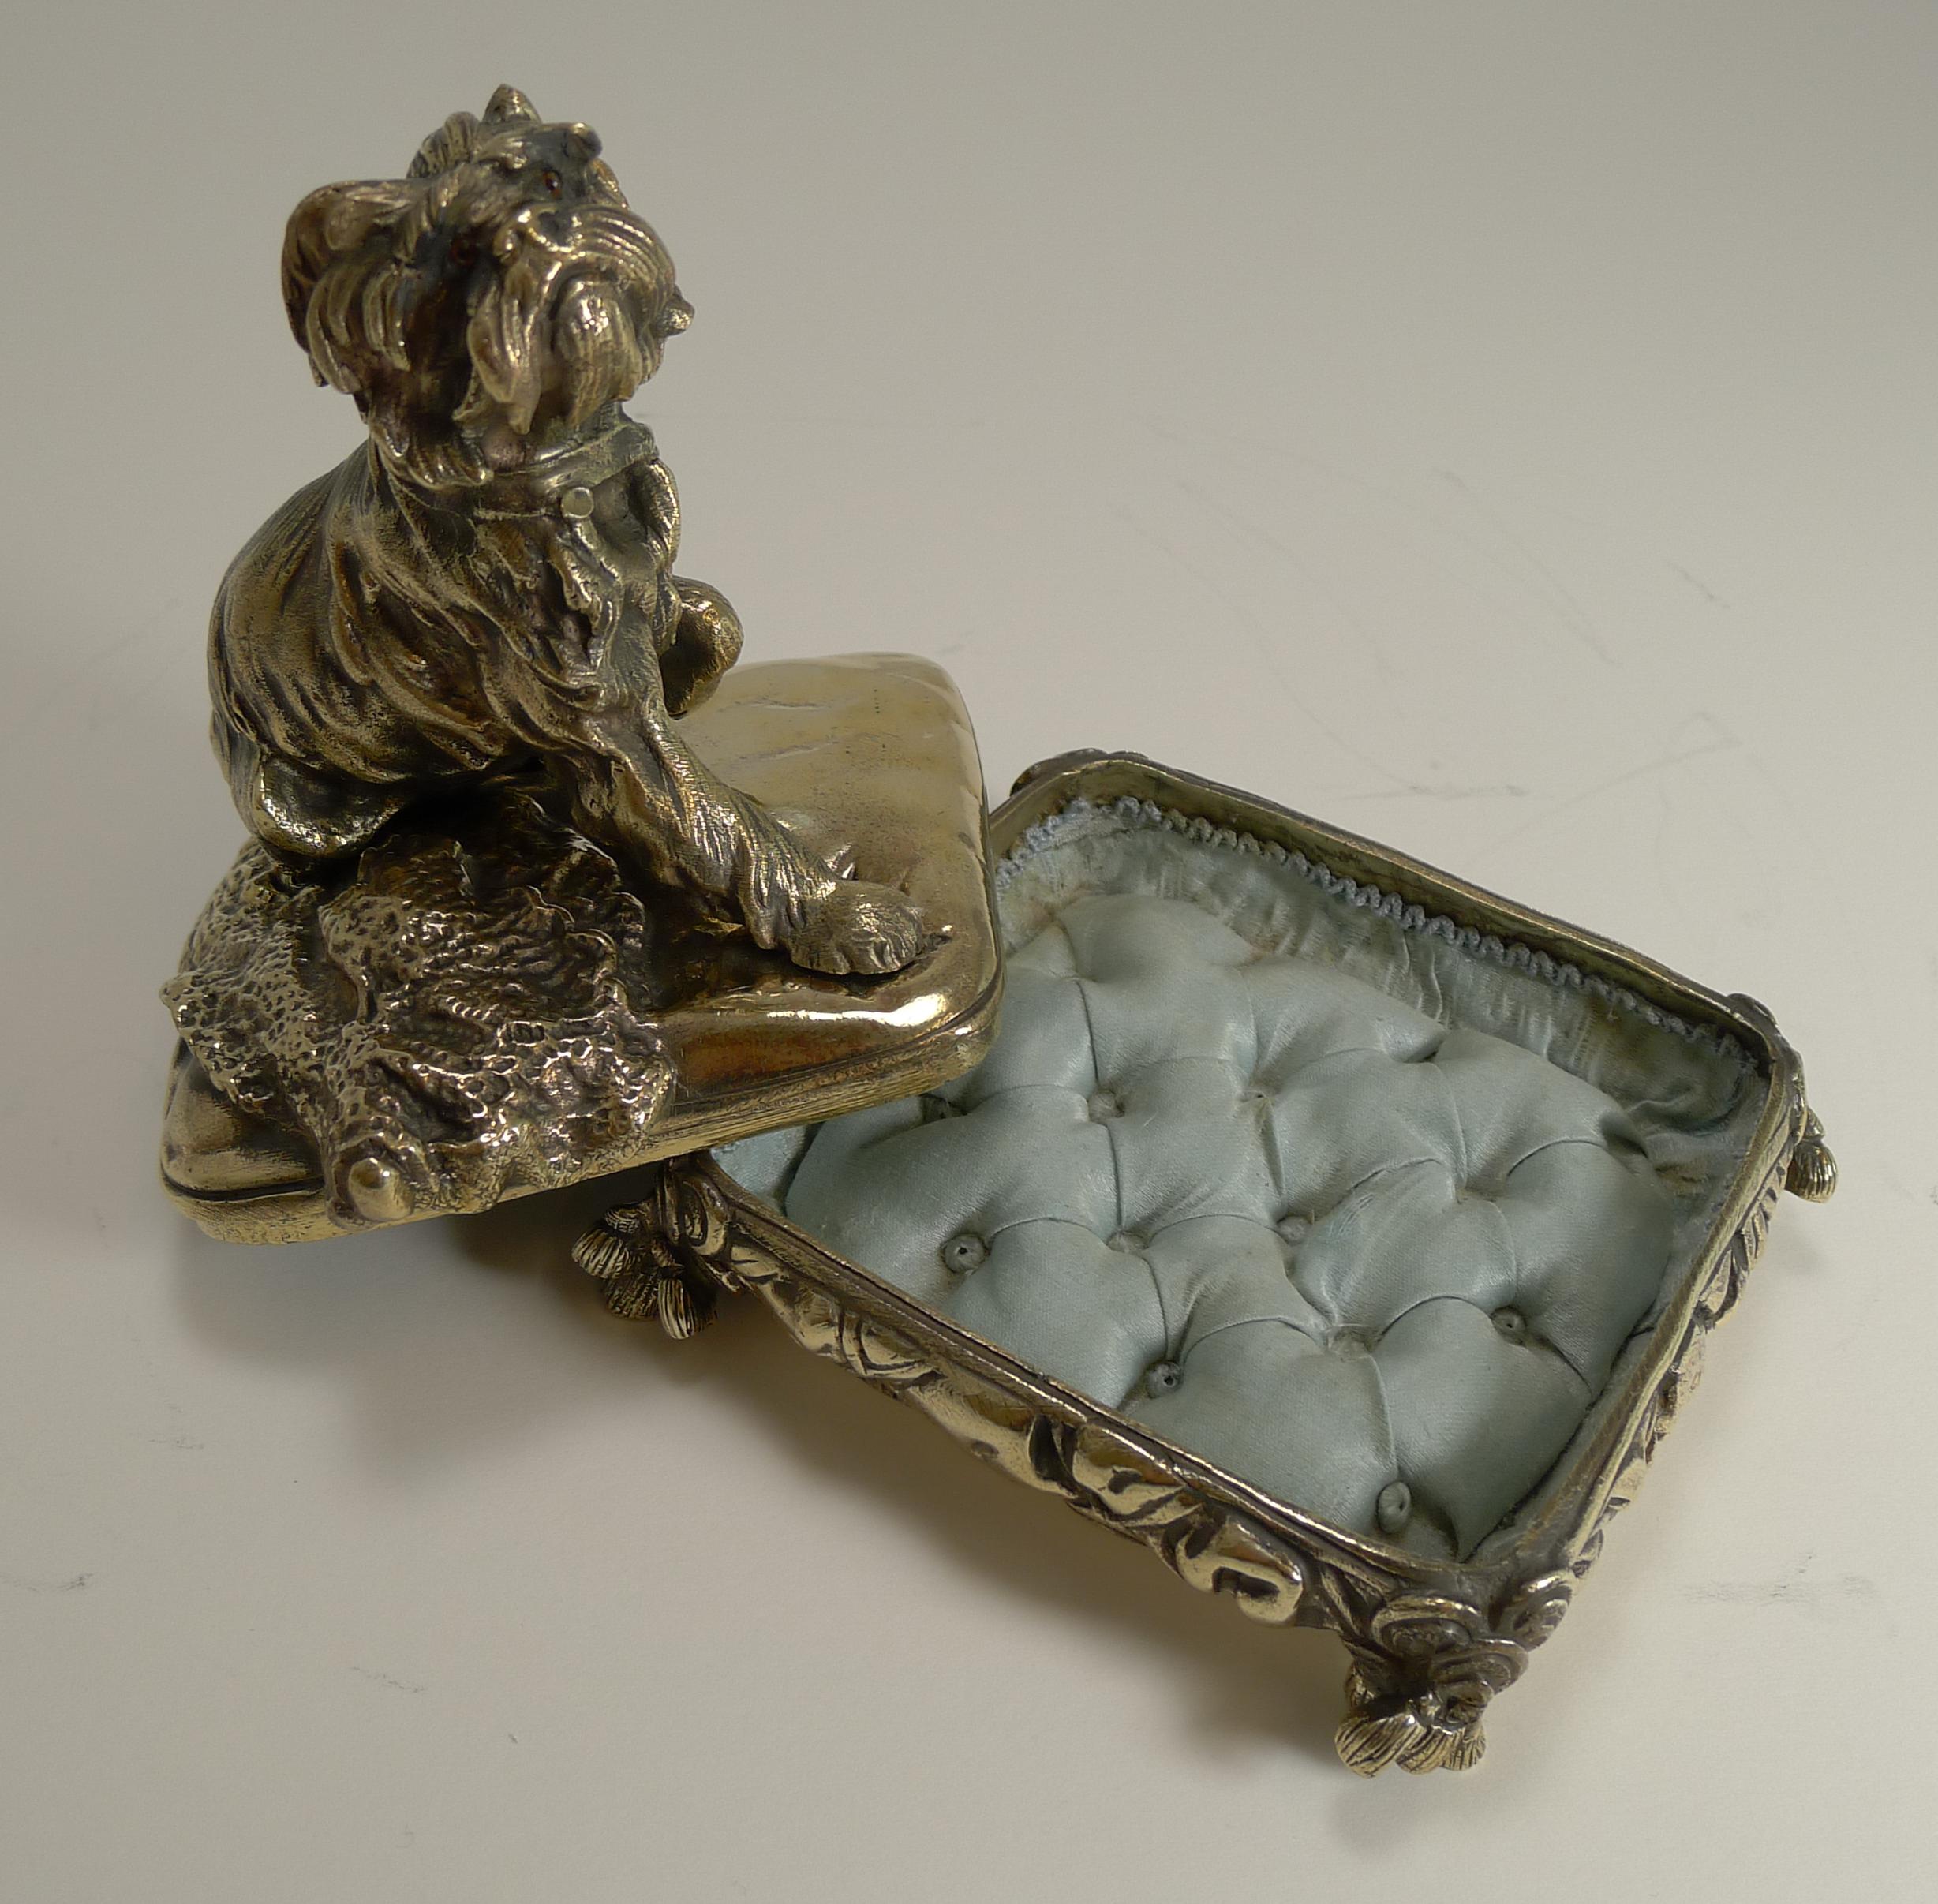 Late 19th Century Antique English Brass or Bronze Dog Jewelry Box, circa 1880 For Sale